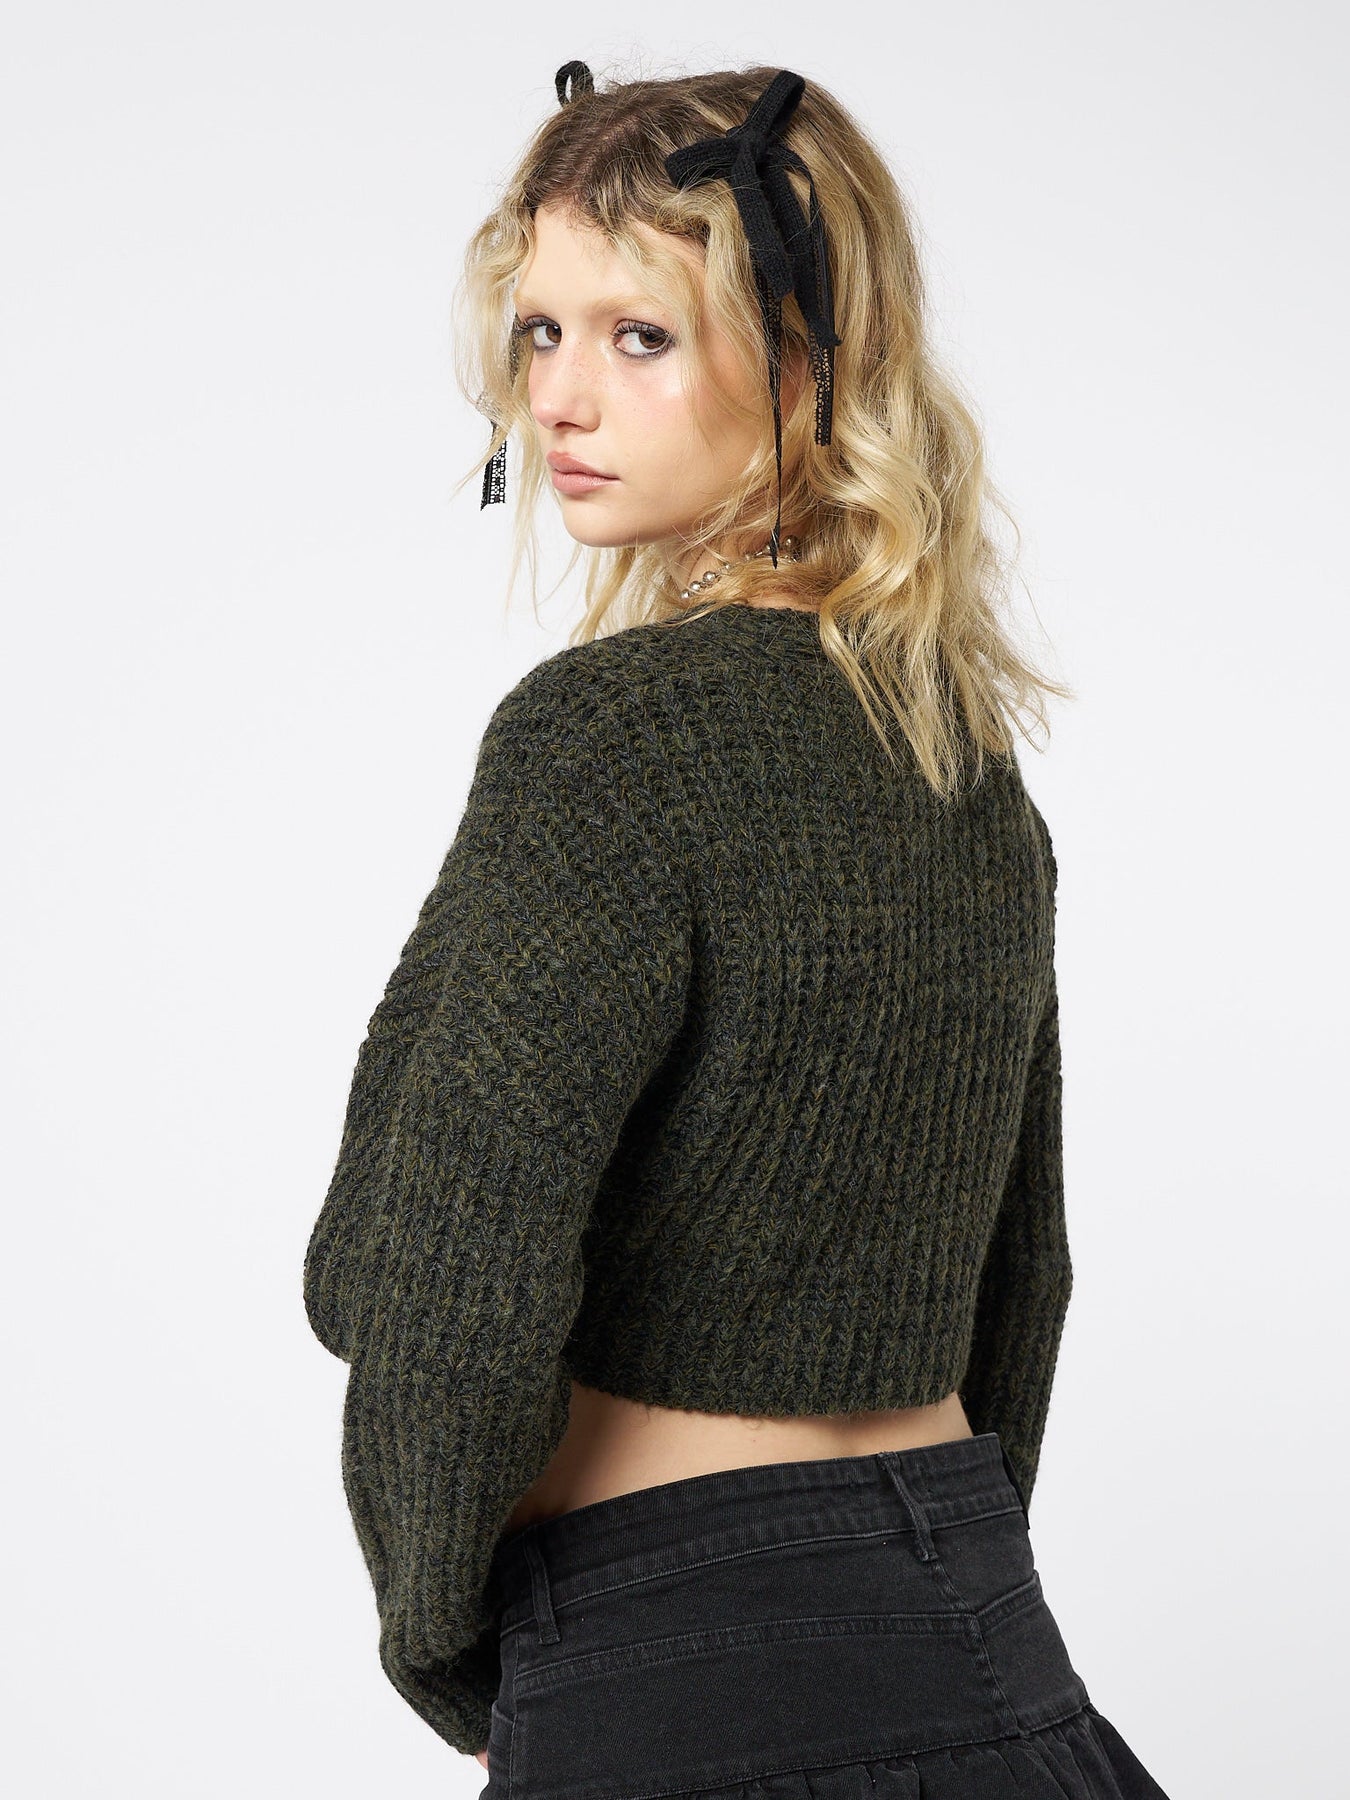 Lace-Up Knitted Cardigan in Marl Green with Cropped Design and Drop ...